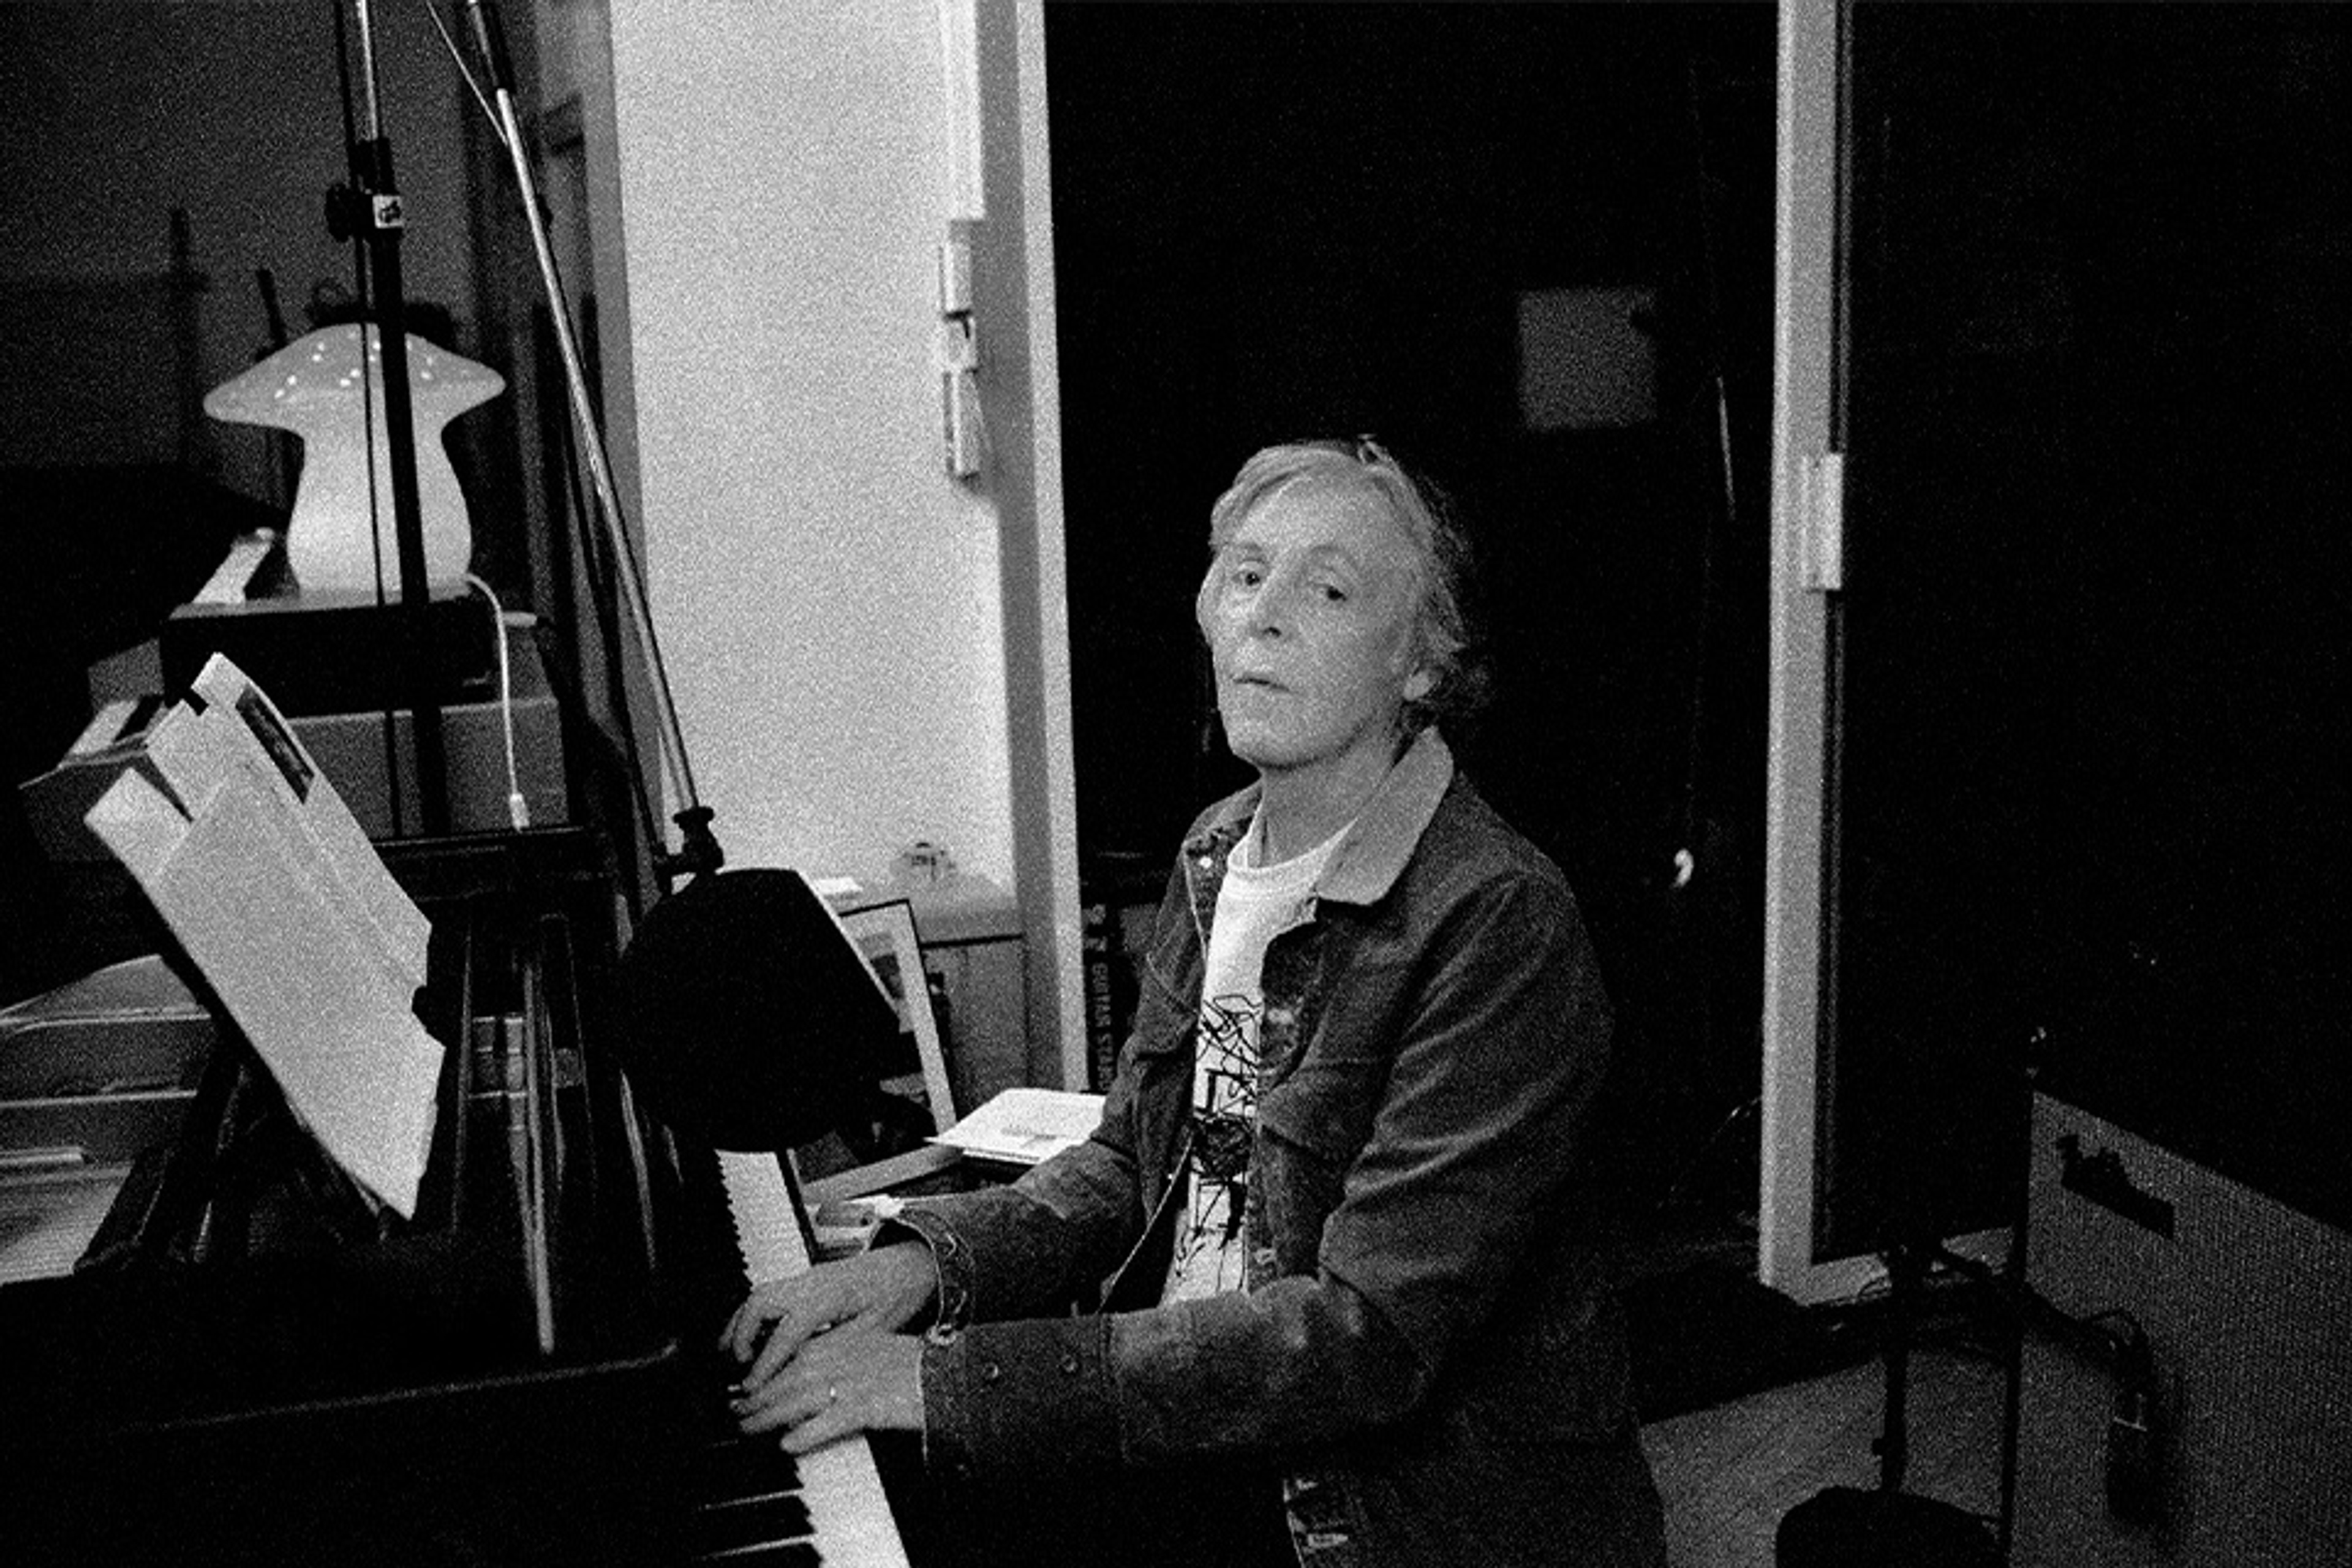 Photo of Paul at the piano taken by Mary McCartney